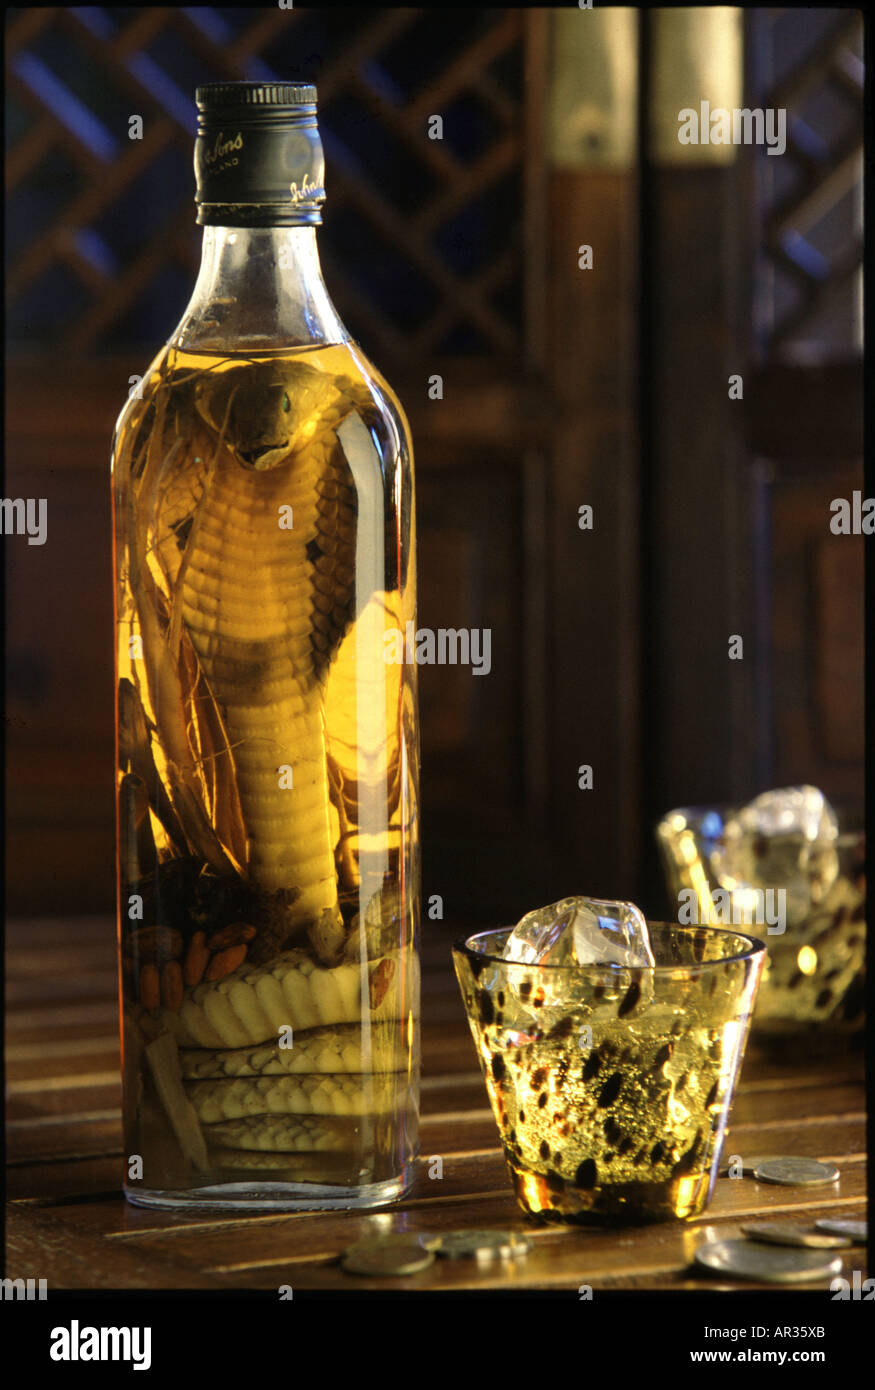 Bottle of spirits with pickled cobra and glass with ice cubes, Saigon, Vietnam, Asia Stock Photo